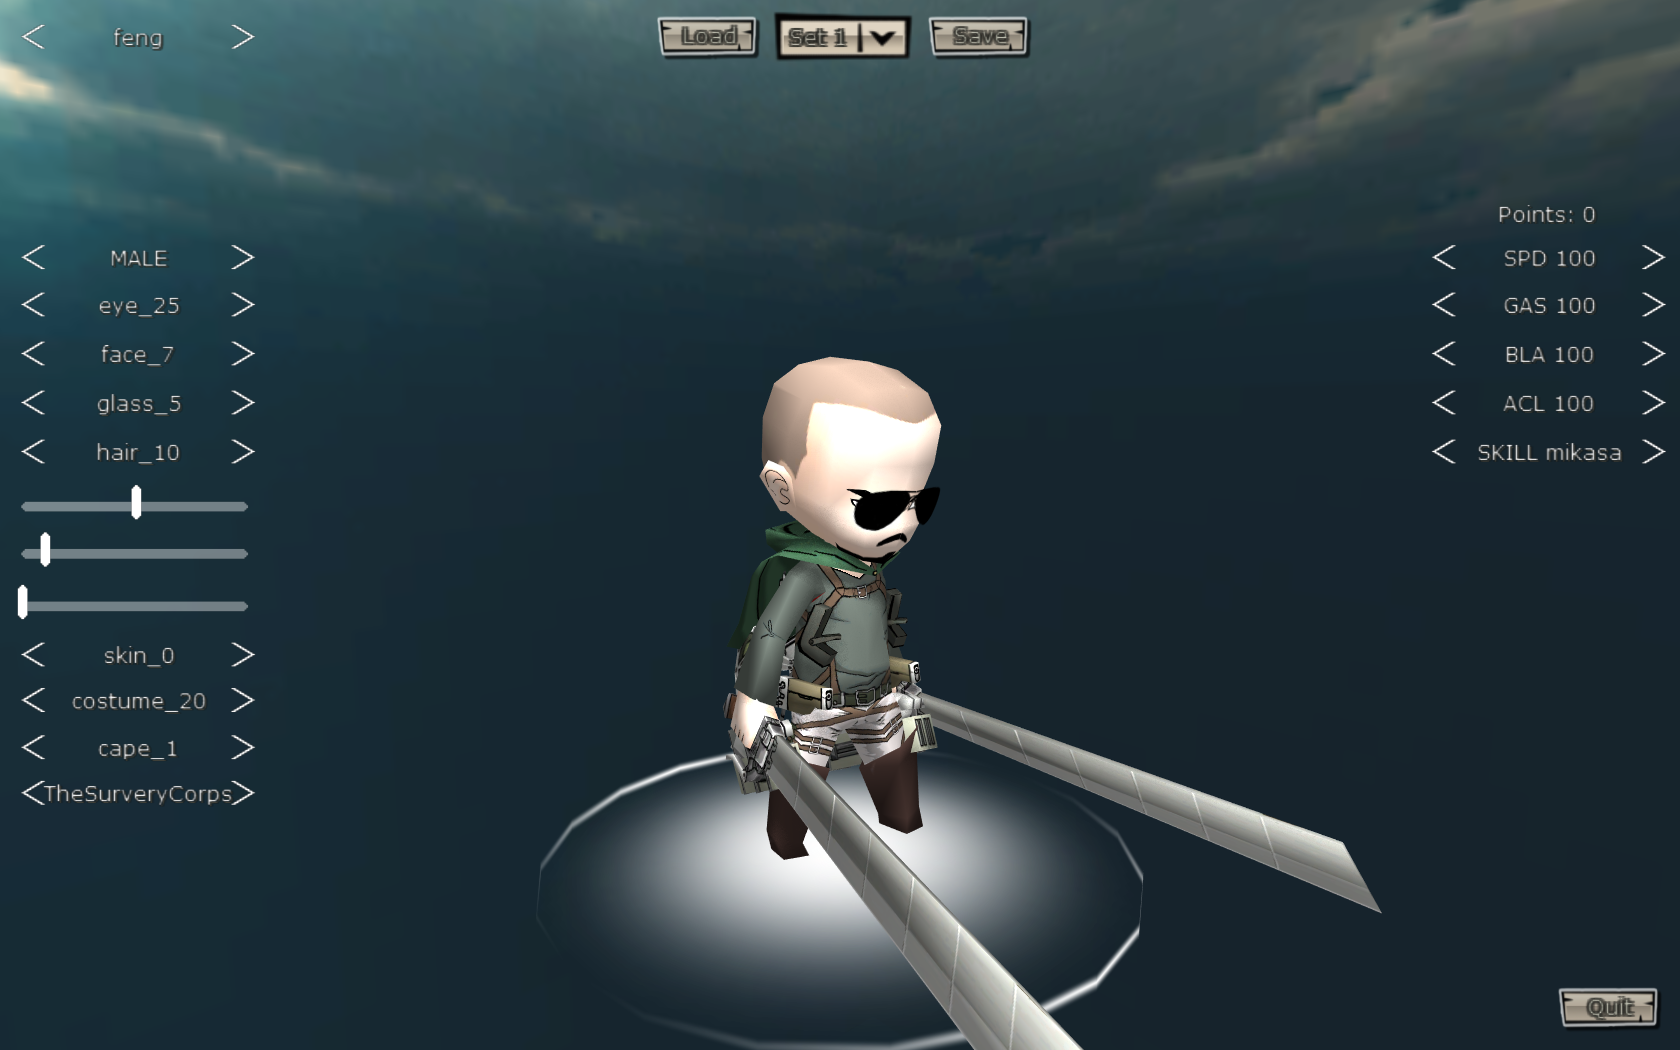 attack on titan tribute game fenglee